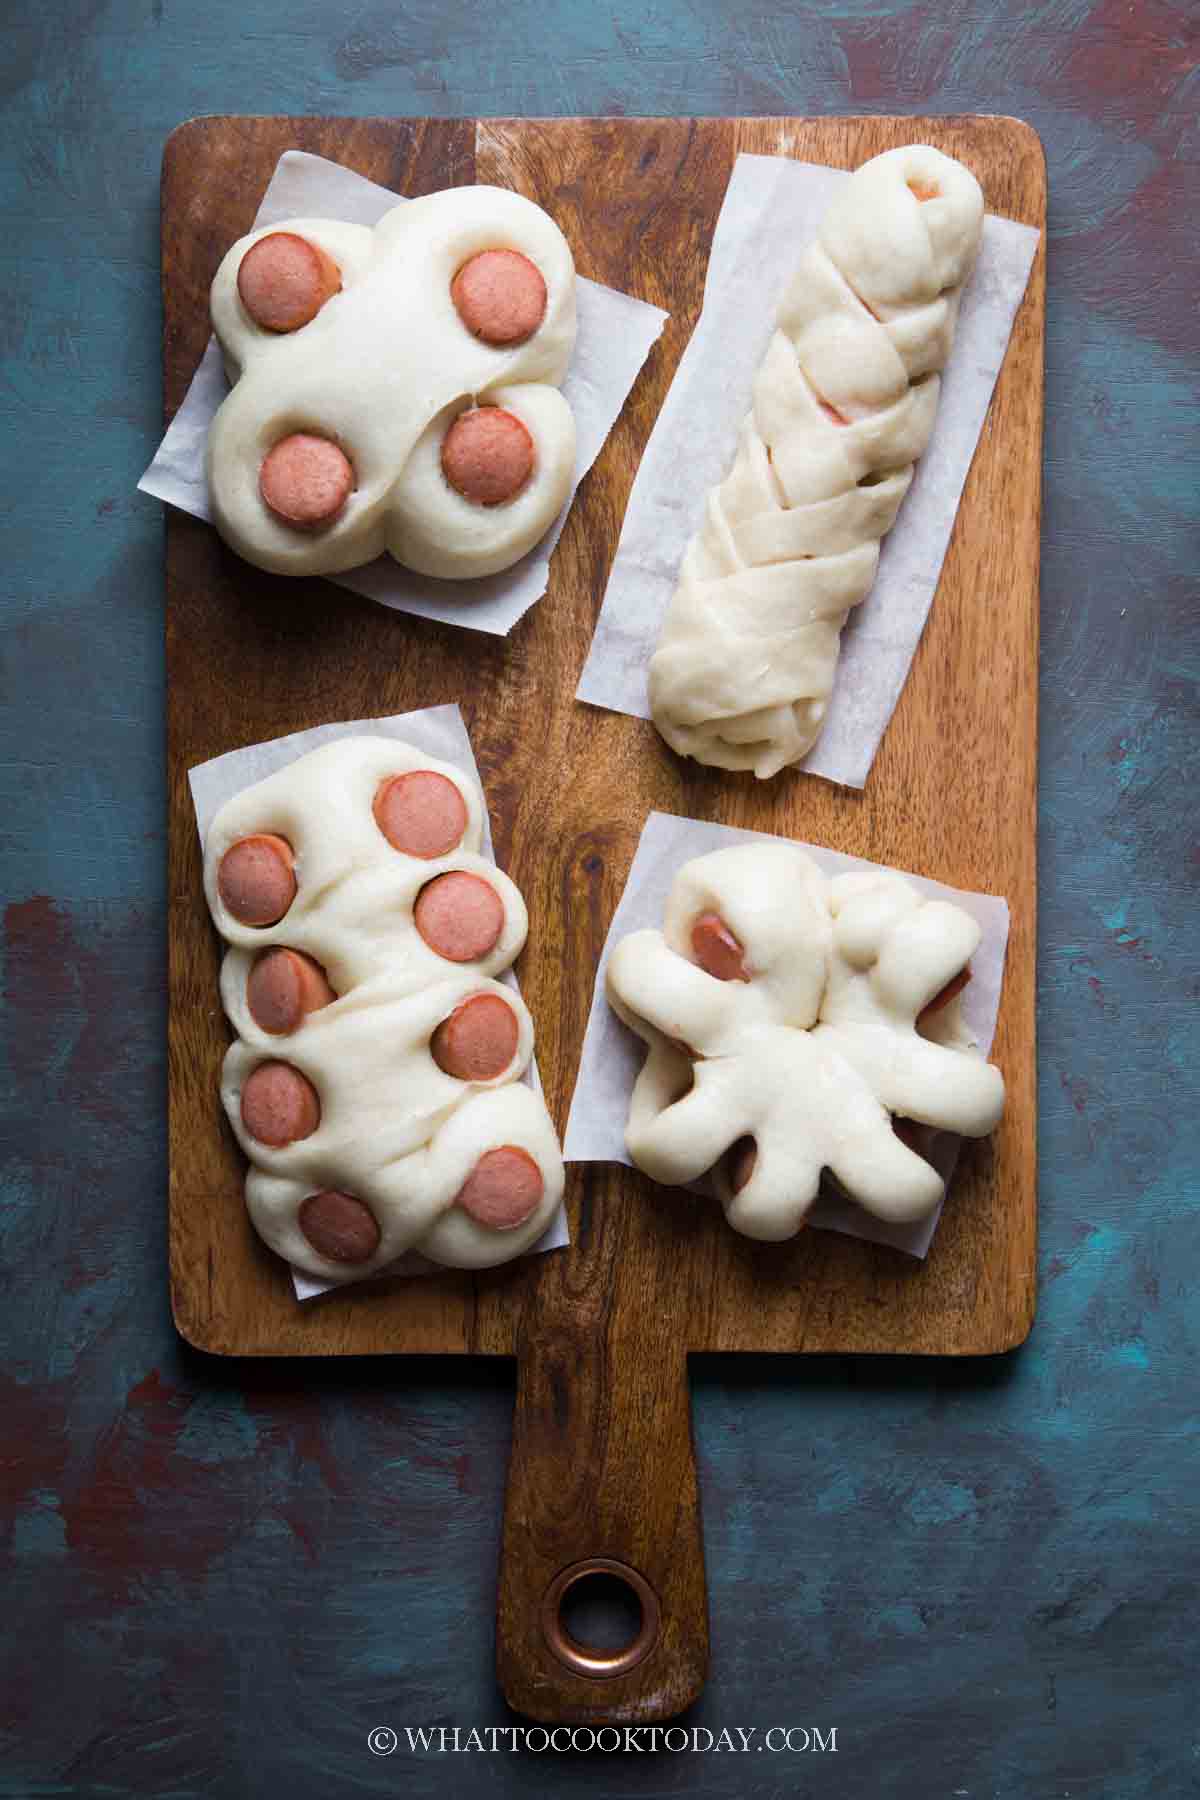 Sausage Steamed Buns / Sausage Bao (with different designs)